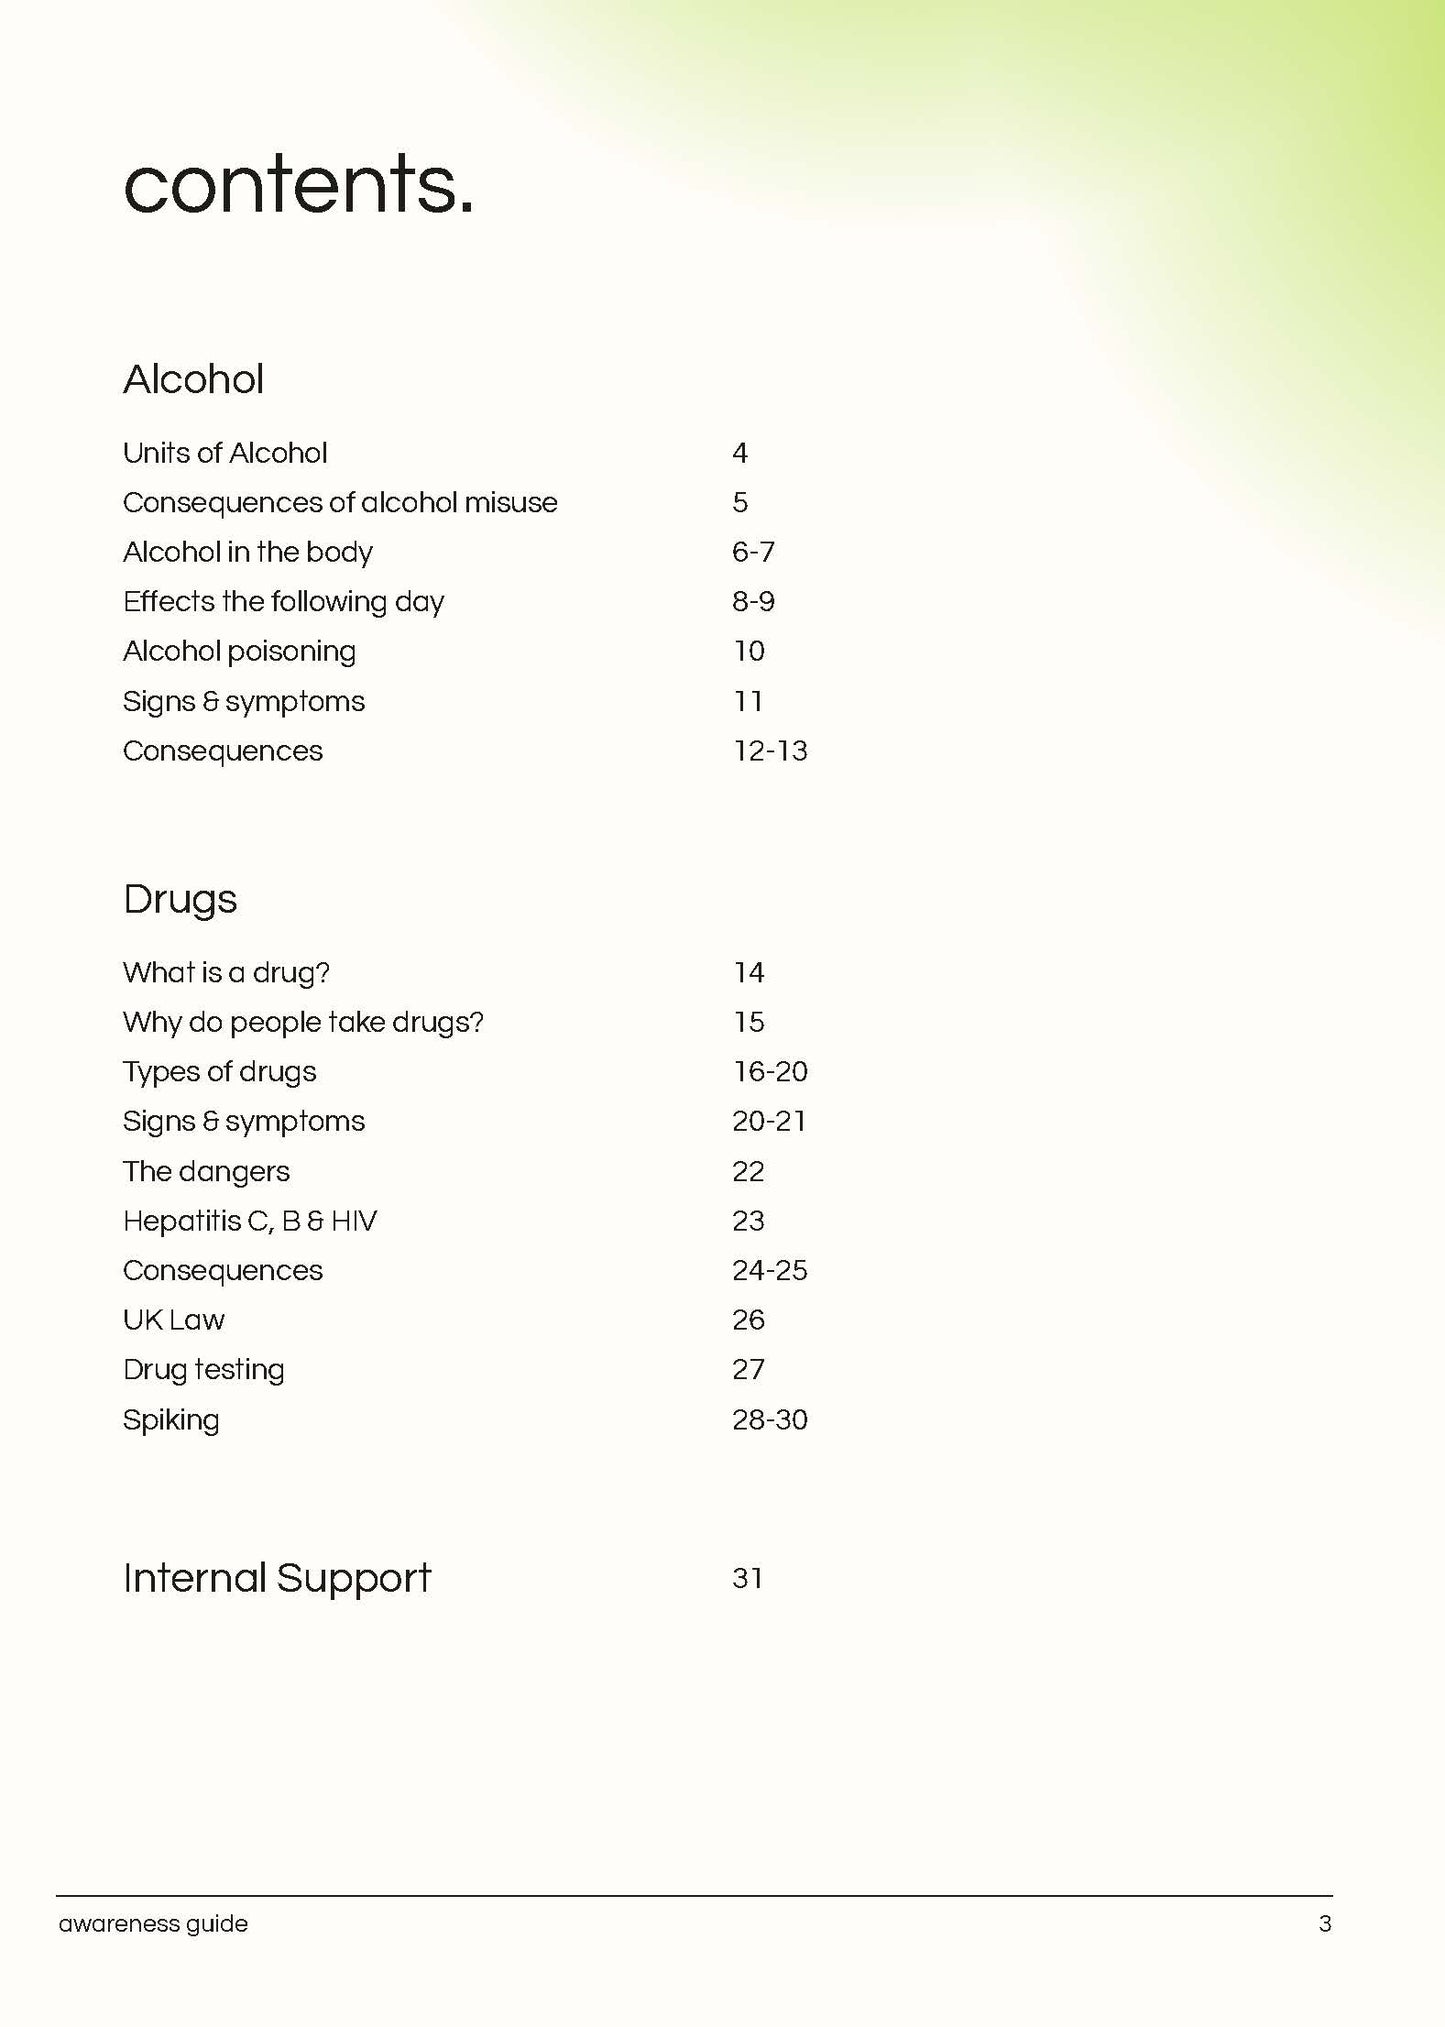 Drug & Alcohol Misuse Employee Awareness Guide